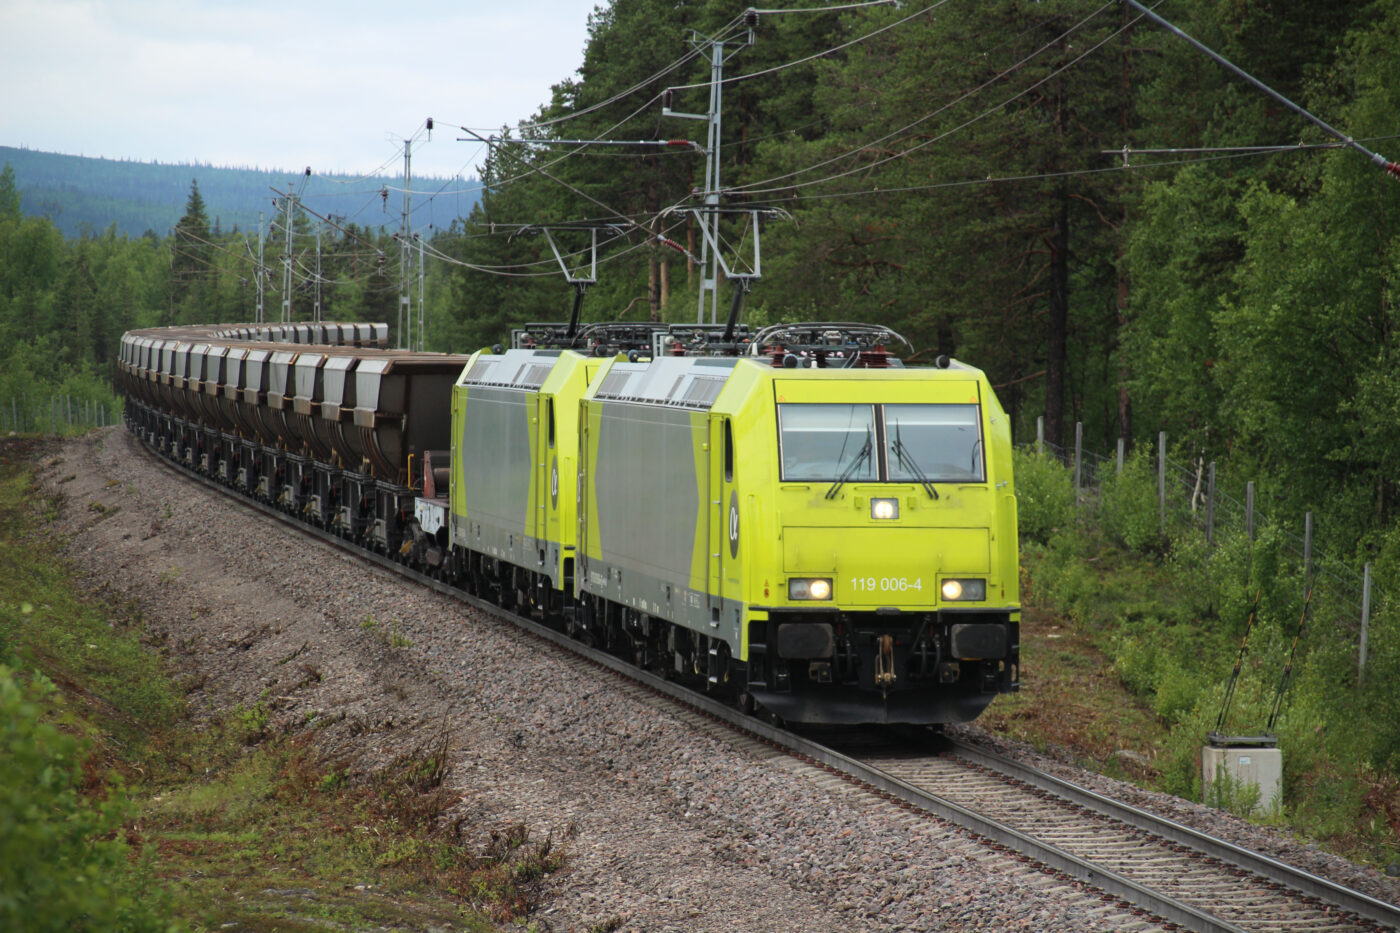 LKAB Malmtrafik extends its contract with Railcare for transporting iron ore worth approximately SEK 40 million